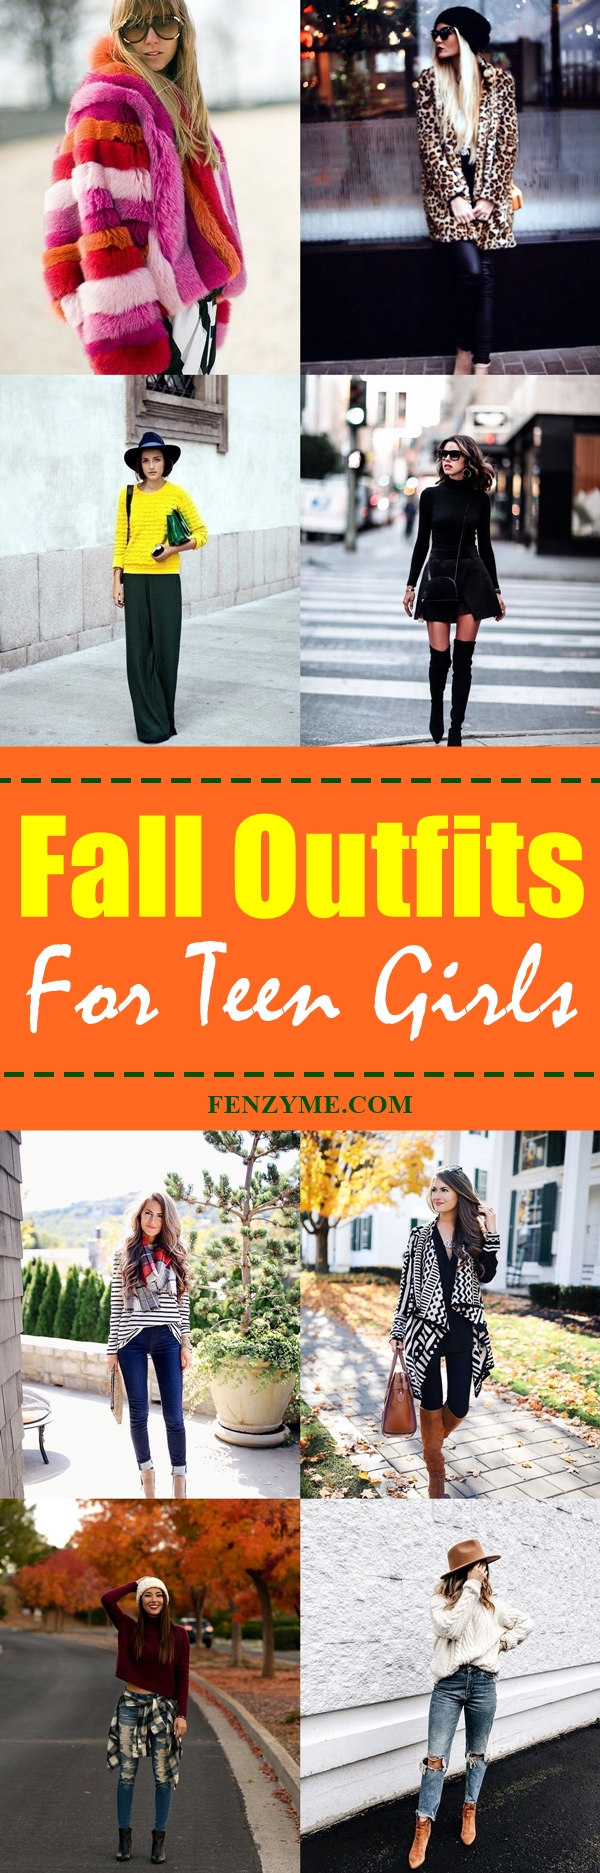 fall-outfits-for-teen-girls